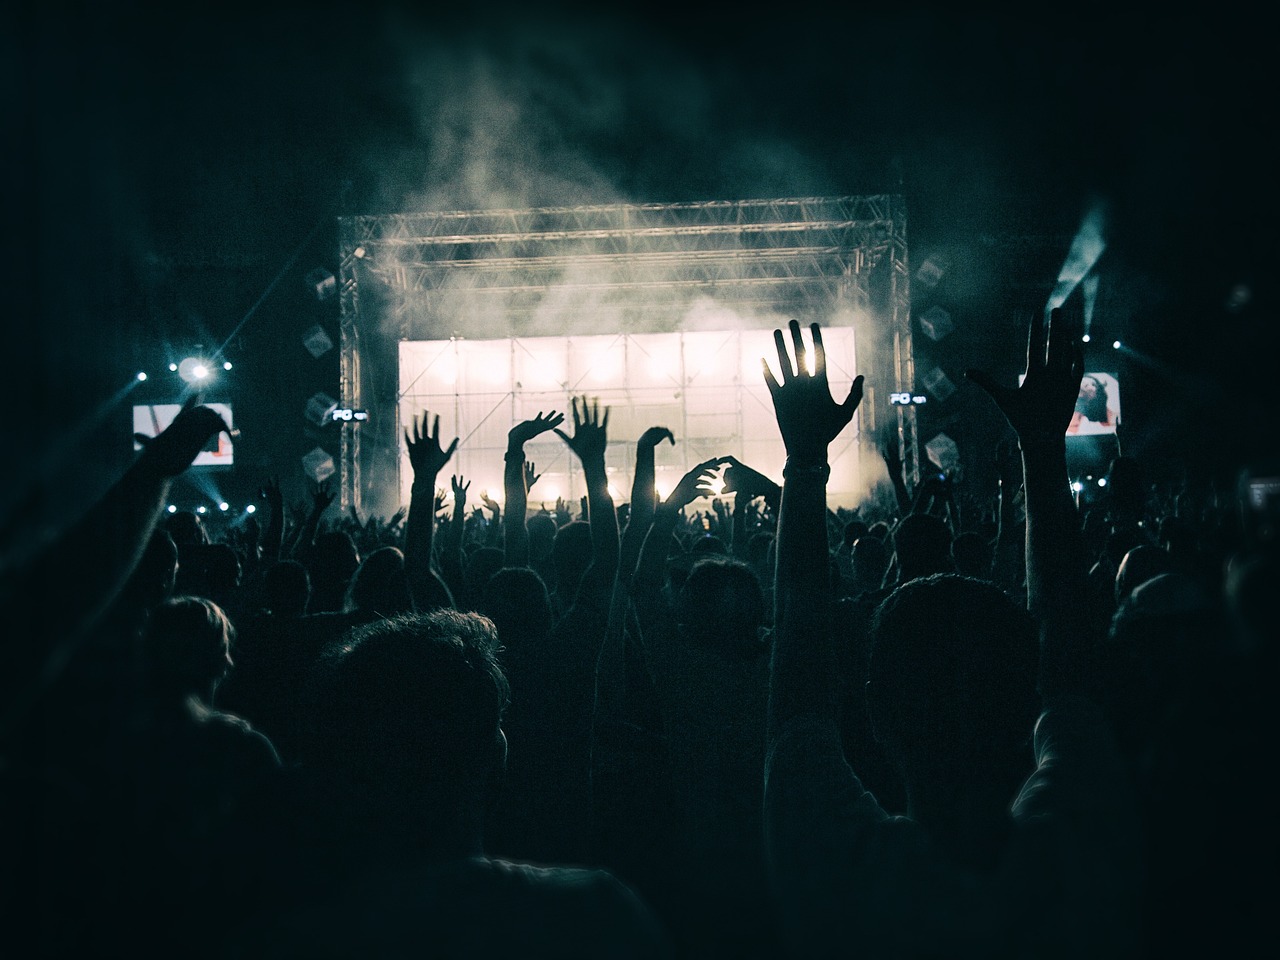 file image of fans in front of a concert stage